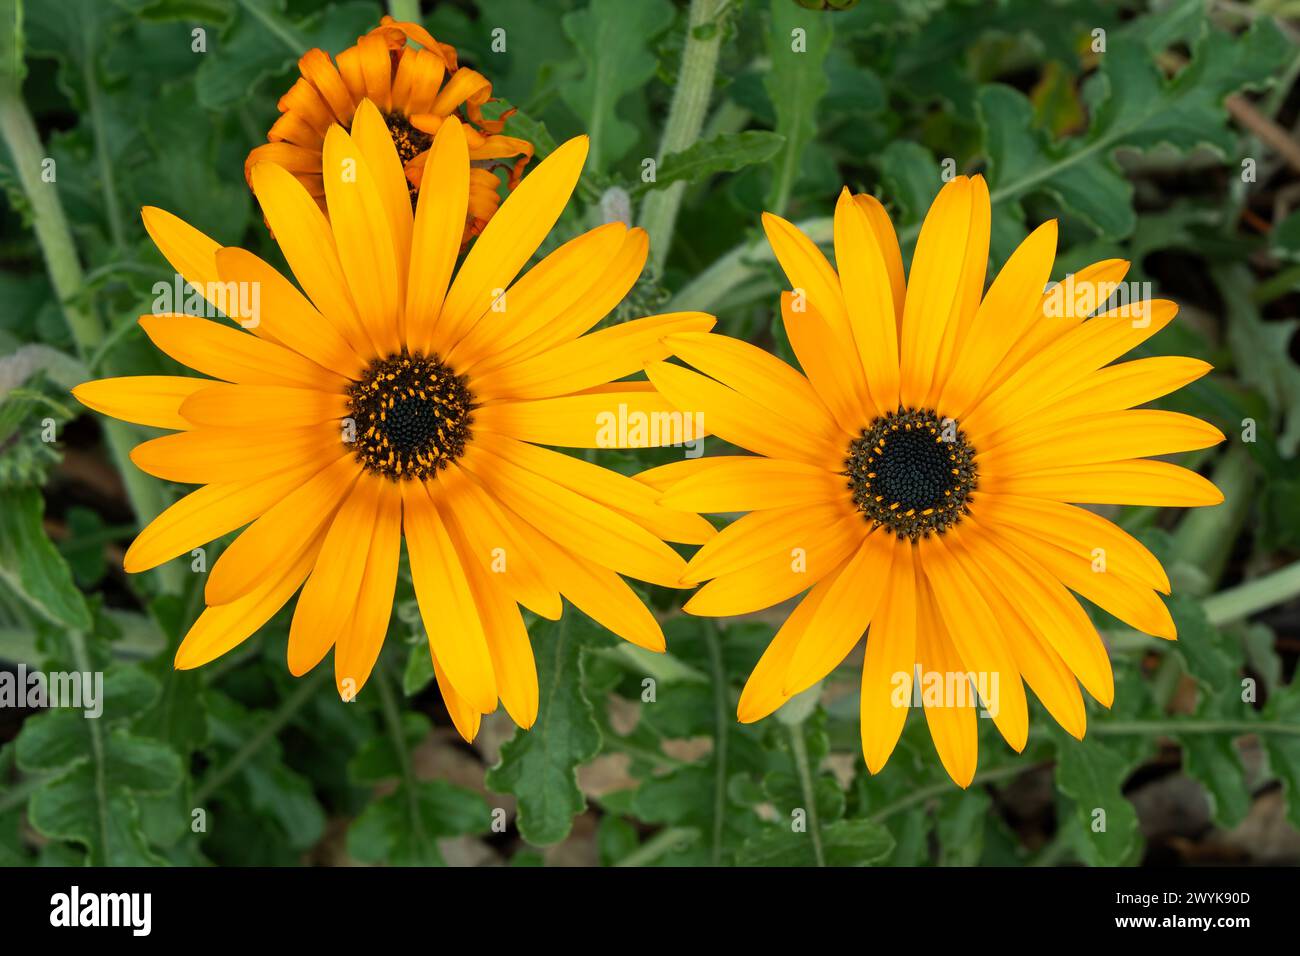 Arctotis adpressa South Africa flower plant commonly known as African Daisy, stock photo image Stock Photo